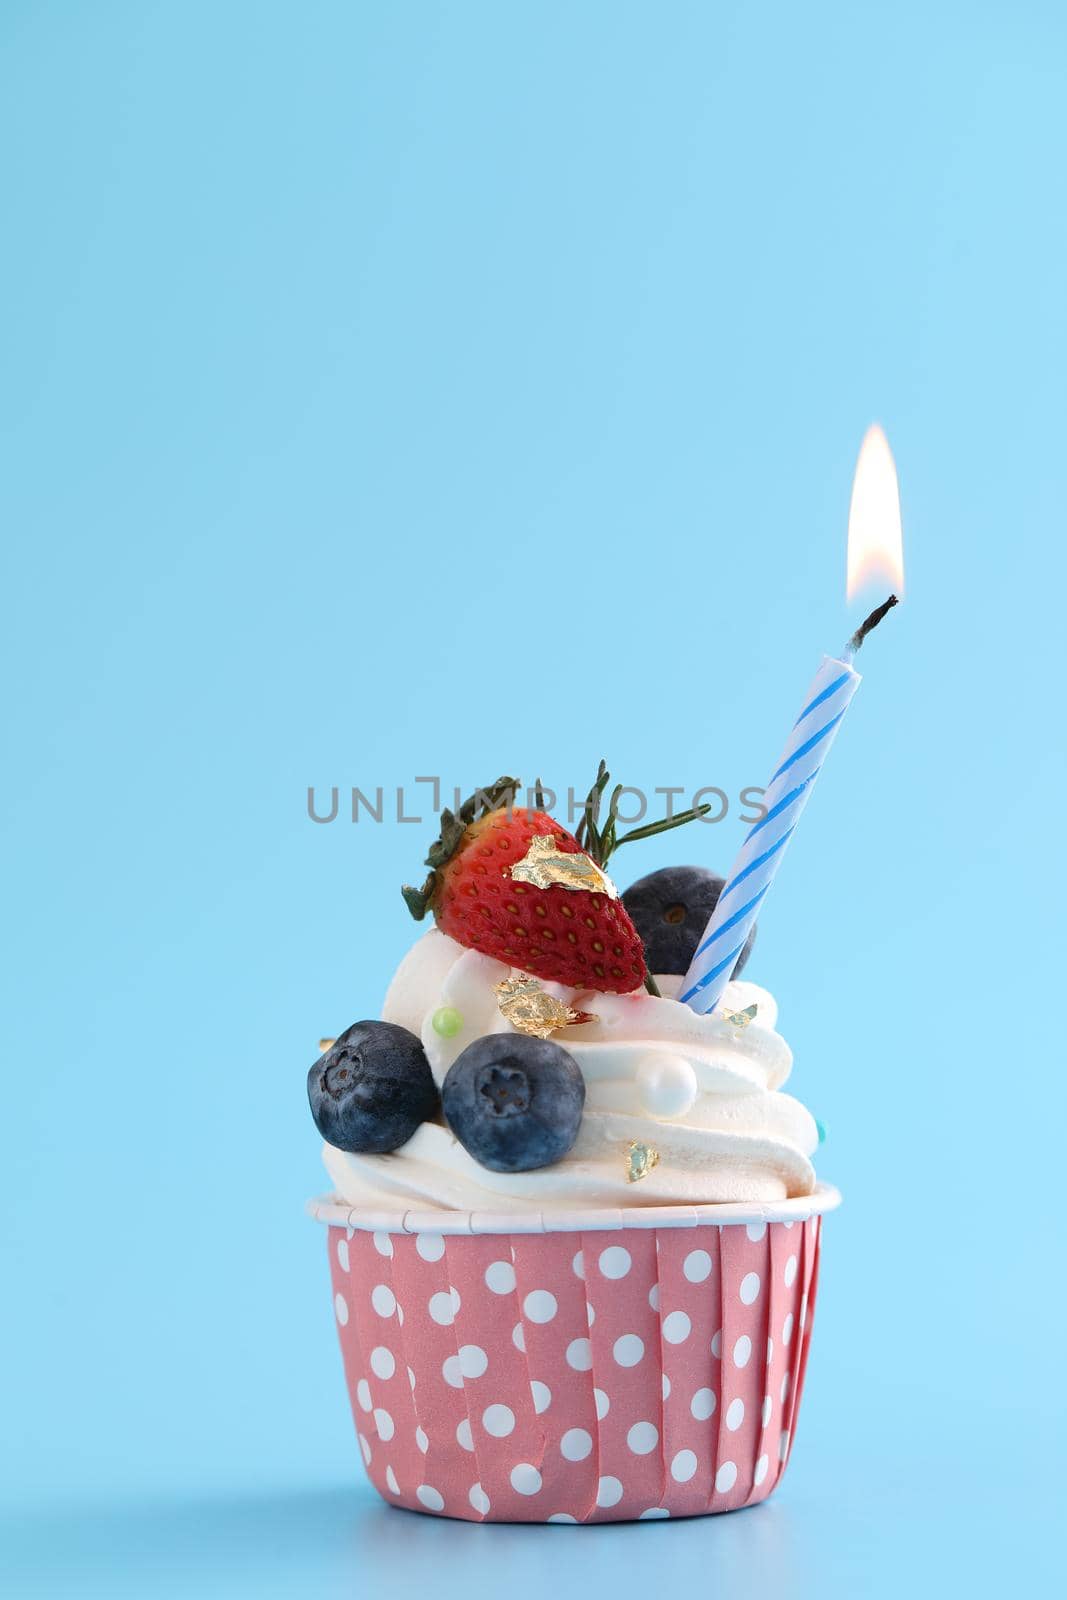 Colorful cupcake with candle isolated in blue background